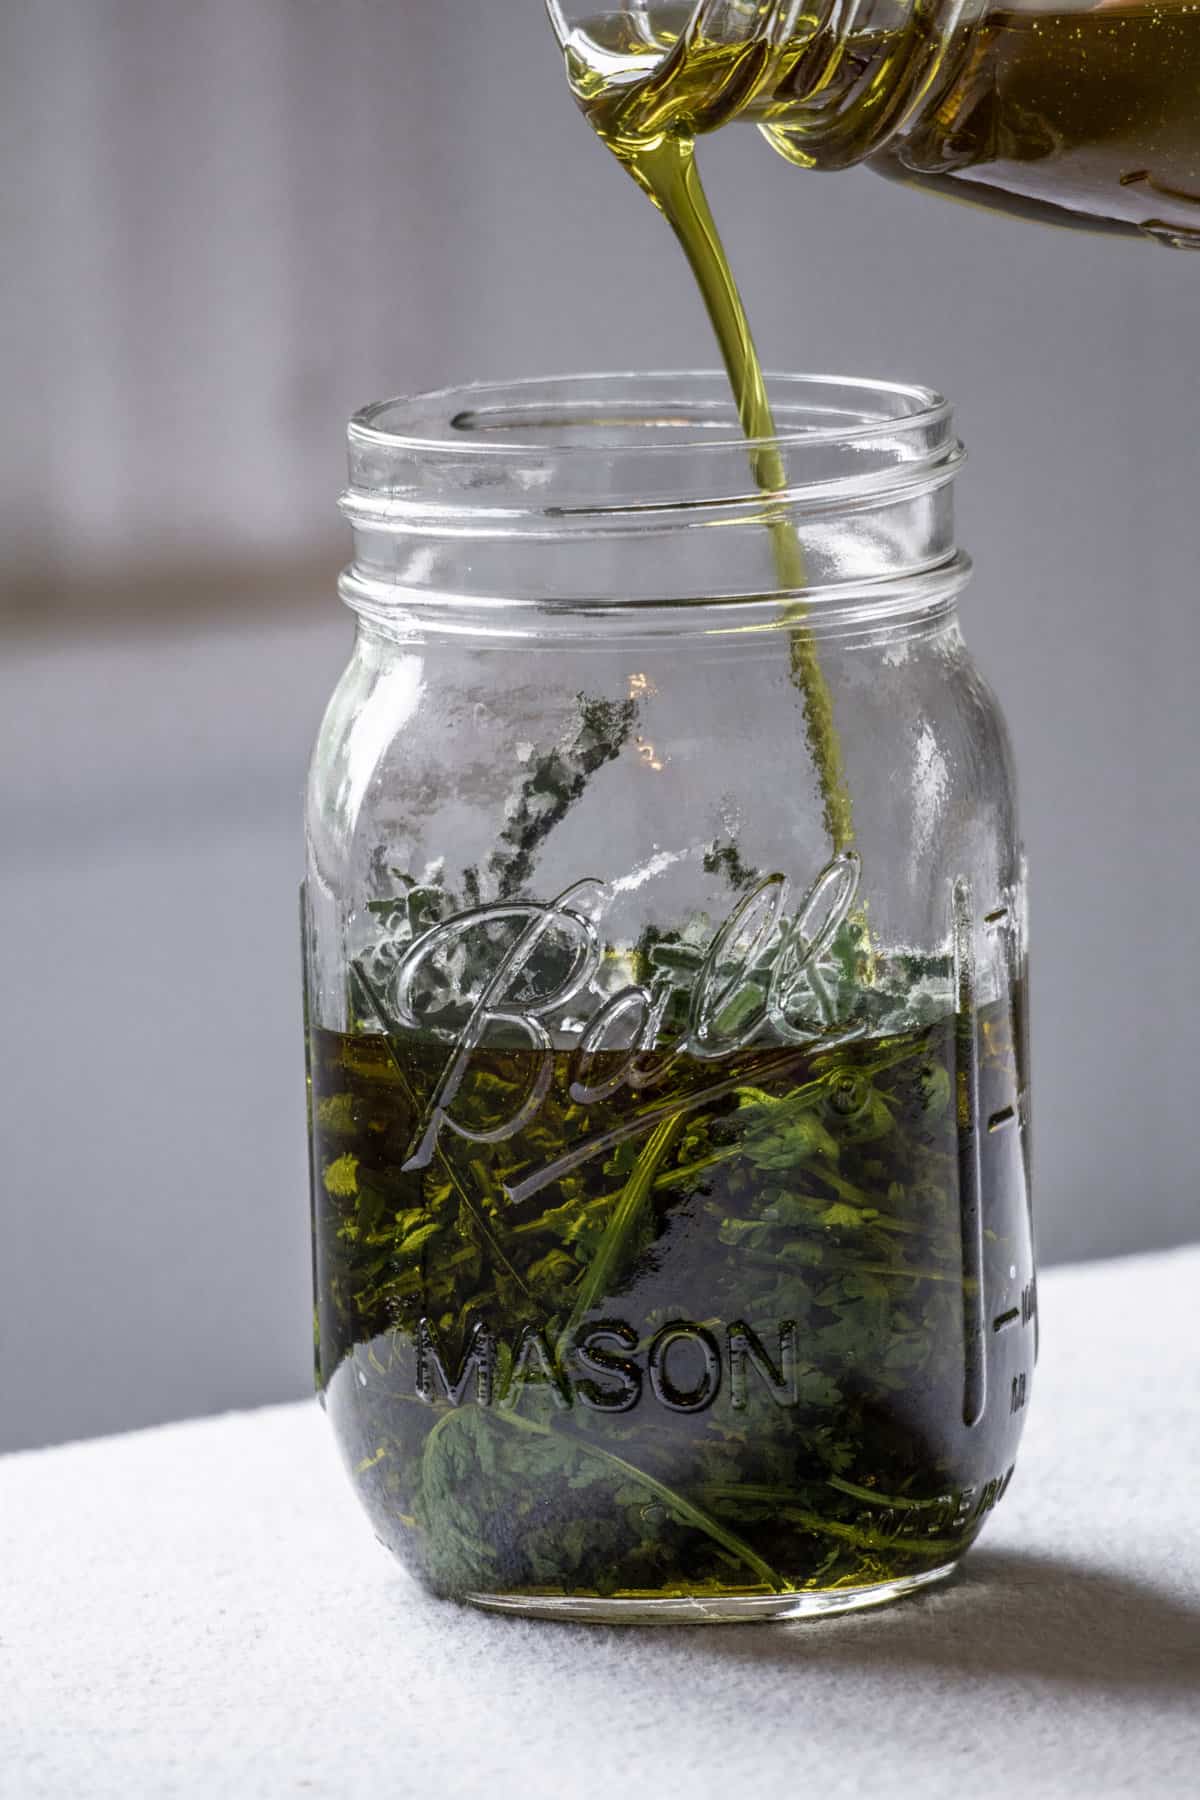 Olive oil being poured into a jar of yarrow leaves